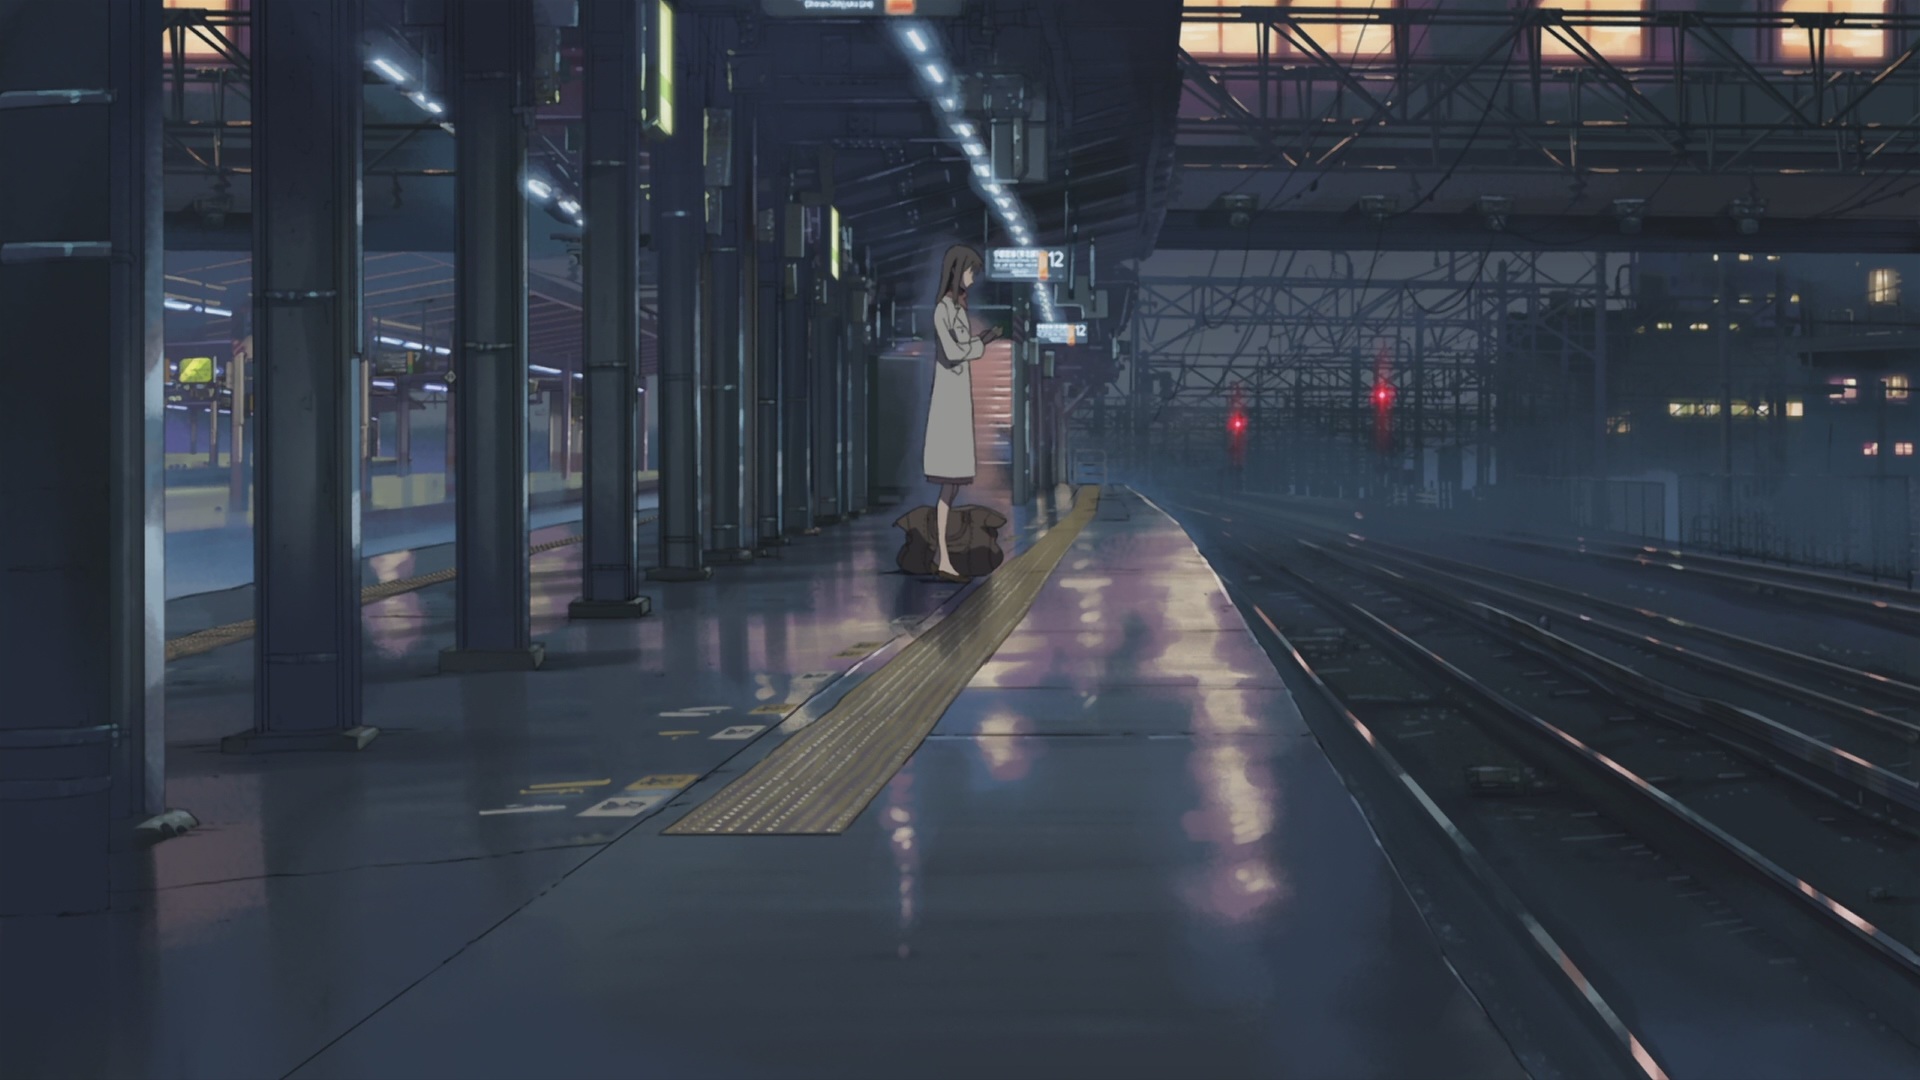 5 Centimeters Per Second Anime Girl Train Station 1920x1080